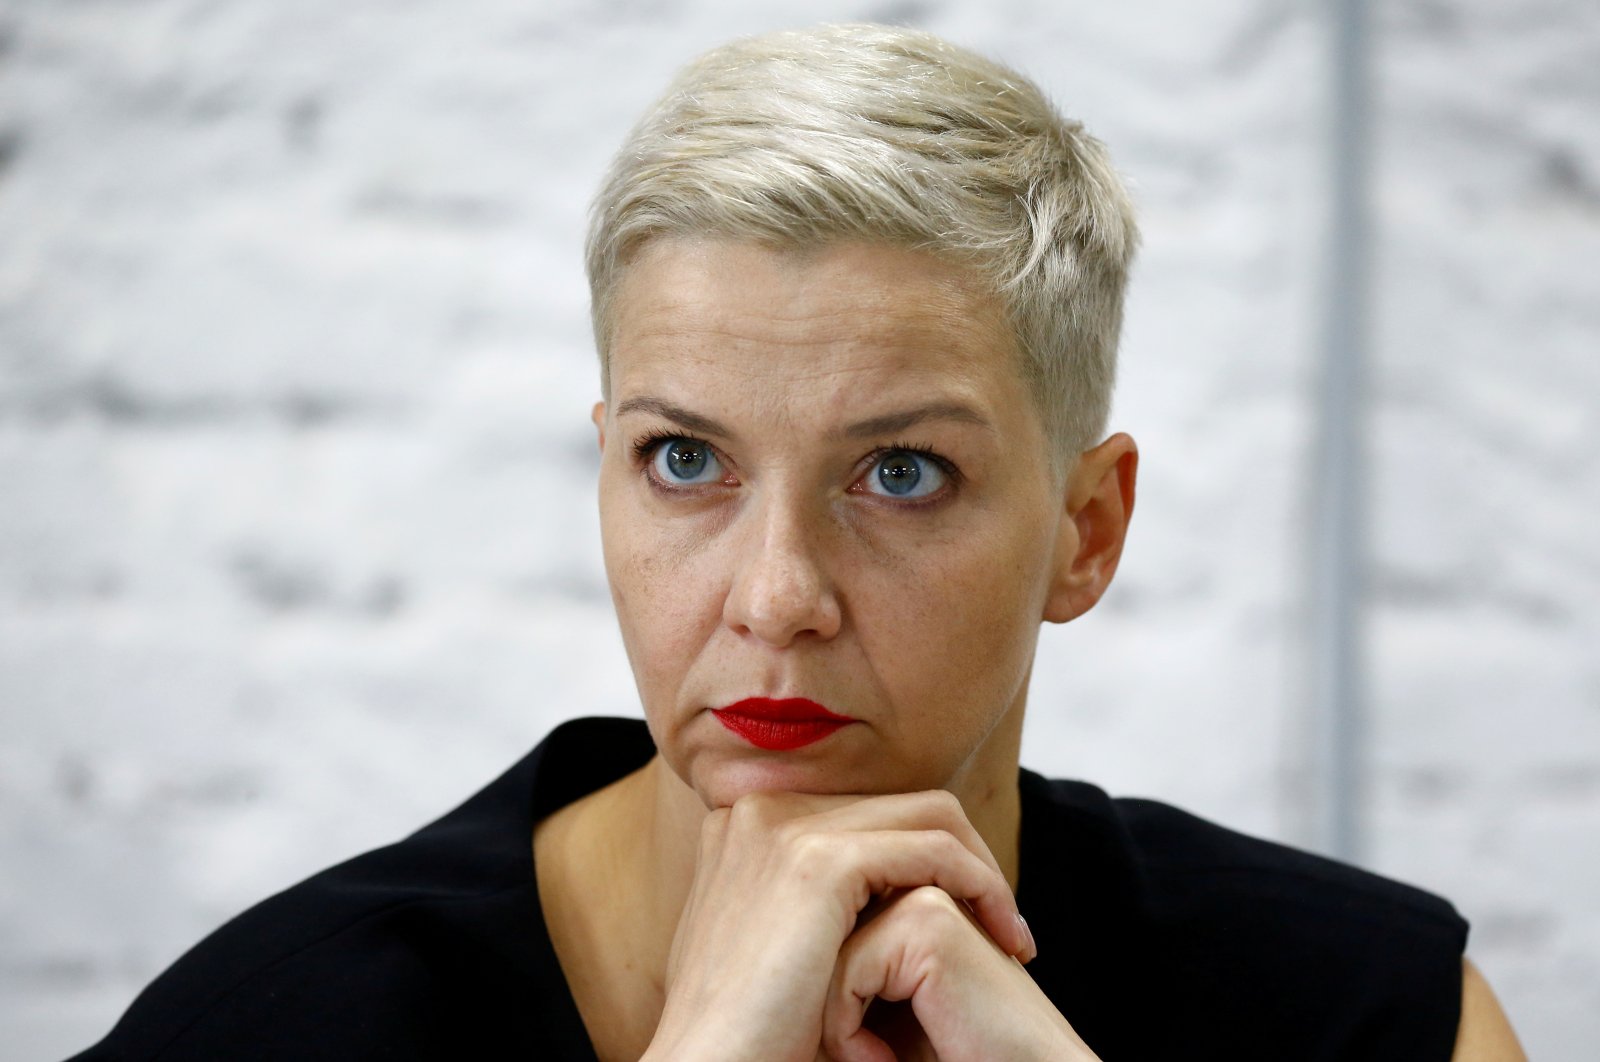 Politician and representative of the Coordination Council for members of the Belarusian opposition Maria Kolesnikova attends a news conference in Minsk, Belarus, Aug. 24, 2020. (Reuters Photo)